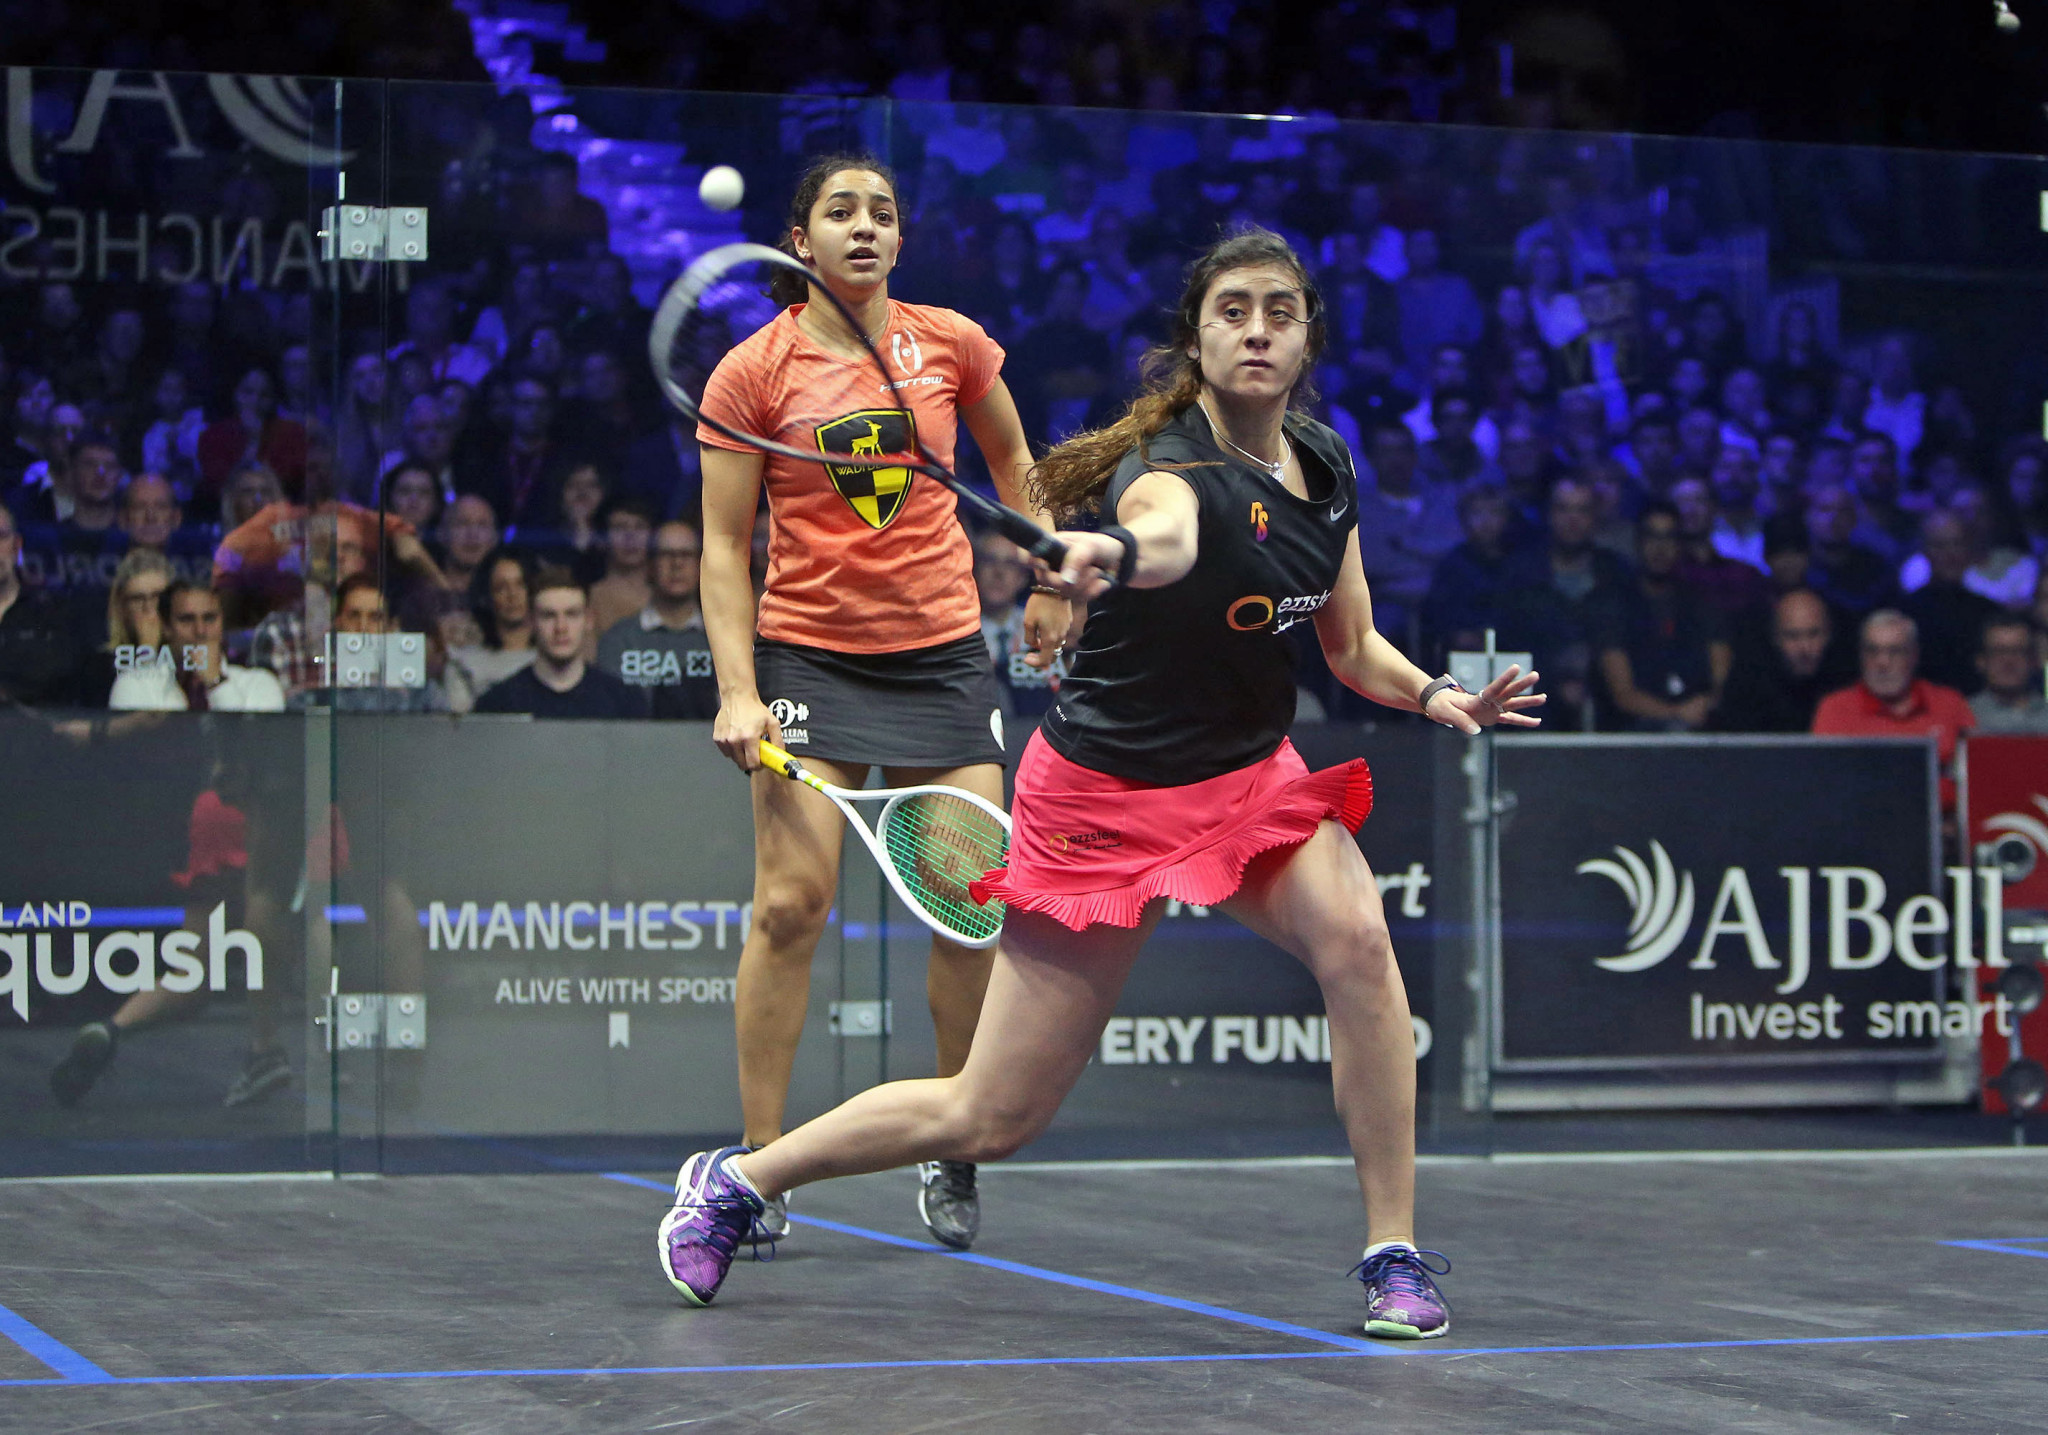 All squash world finals will be chronicled in the World Squash Library ©Getty Images